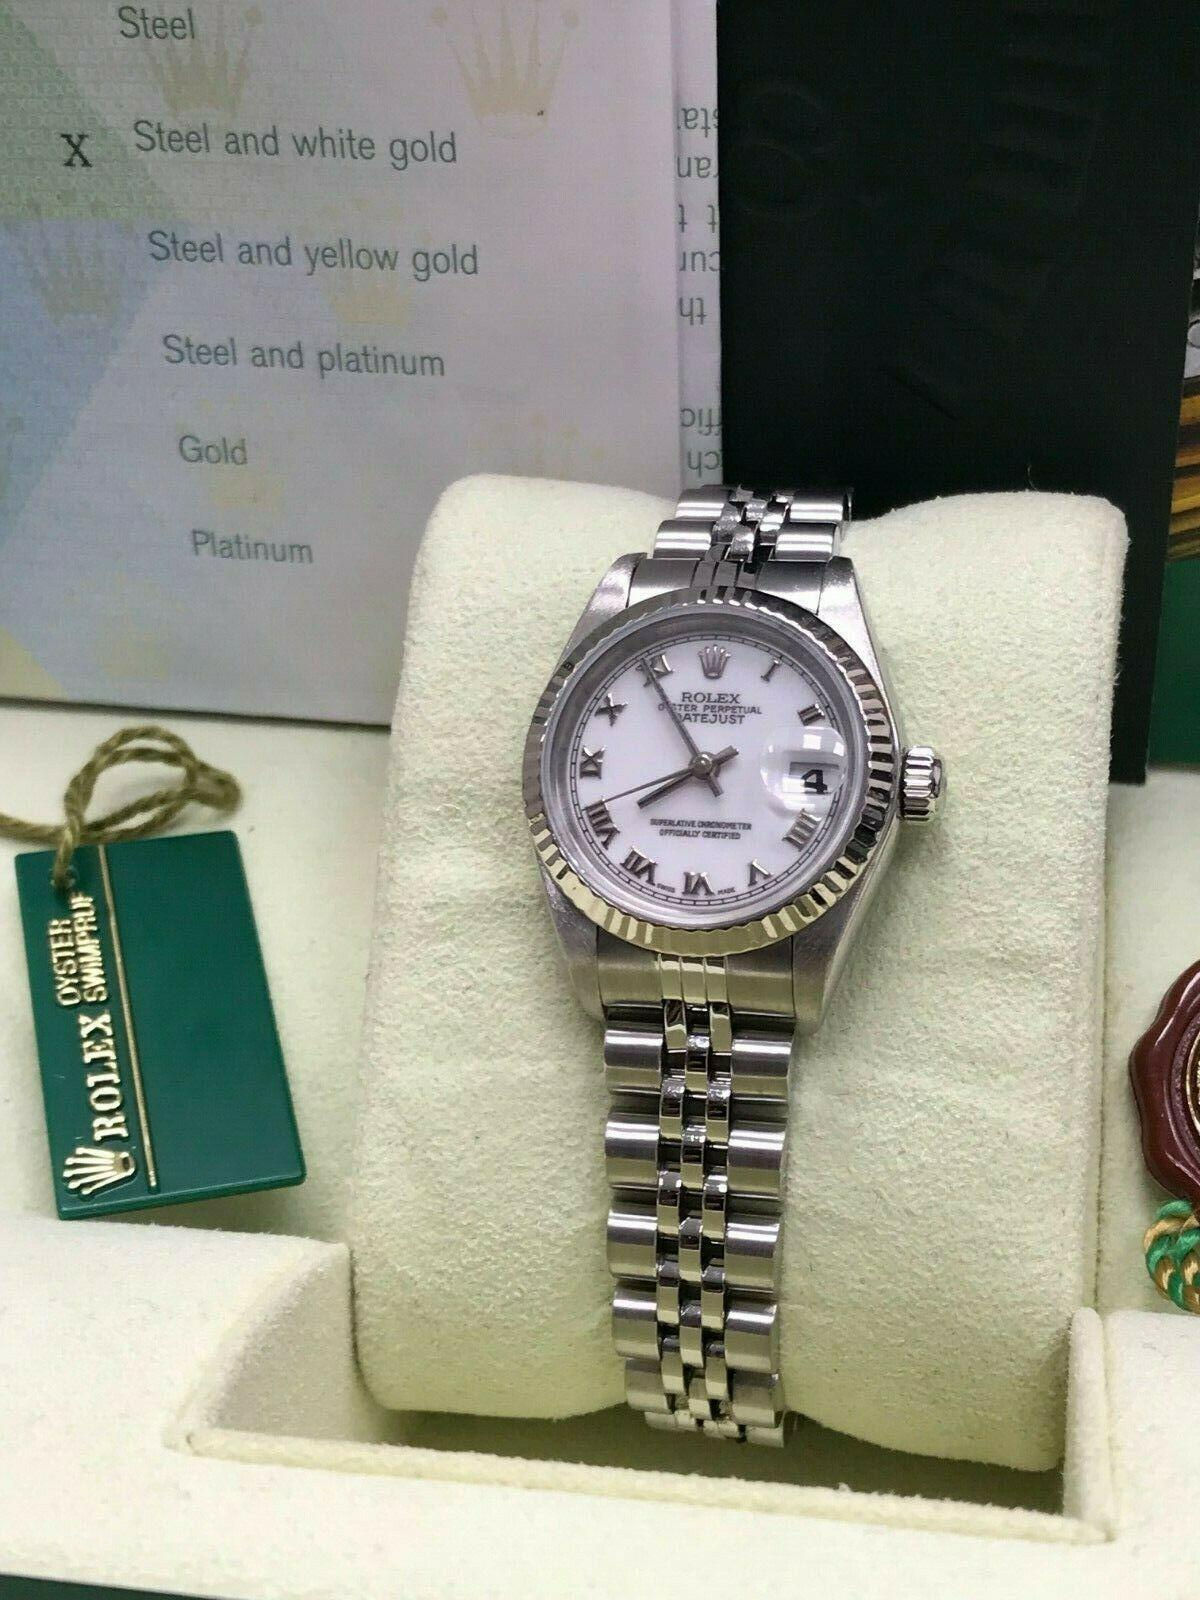 Style Number: 79174

 

Serial: F117***



Year: 2004

 

Model: Datejust

 

Case Material: Stainless Steel

 

Band: Stainless Steel

 

Bezel:  18K White Gold

 

Dial: White

 

Face: Sapphire Crystal

 

Case Size: 26mm

 

Includes: 

-Rolex